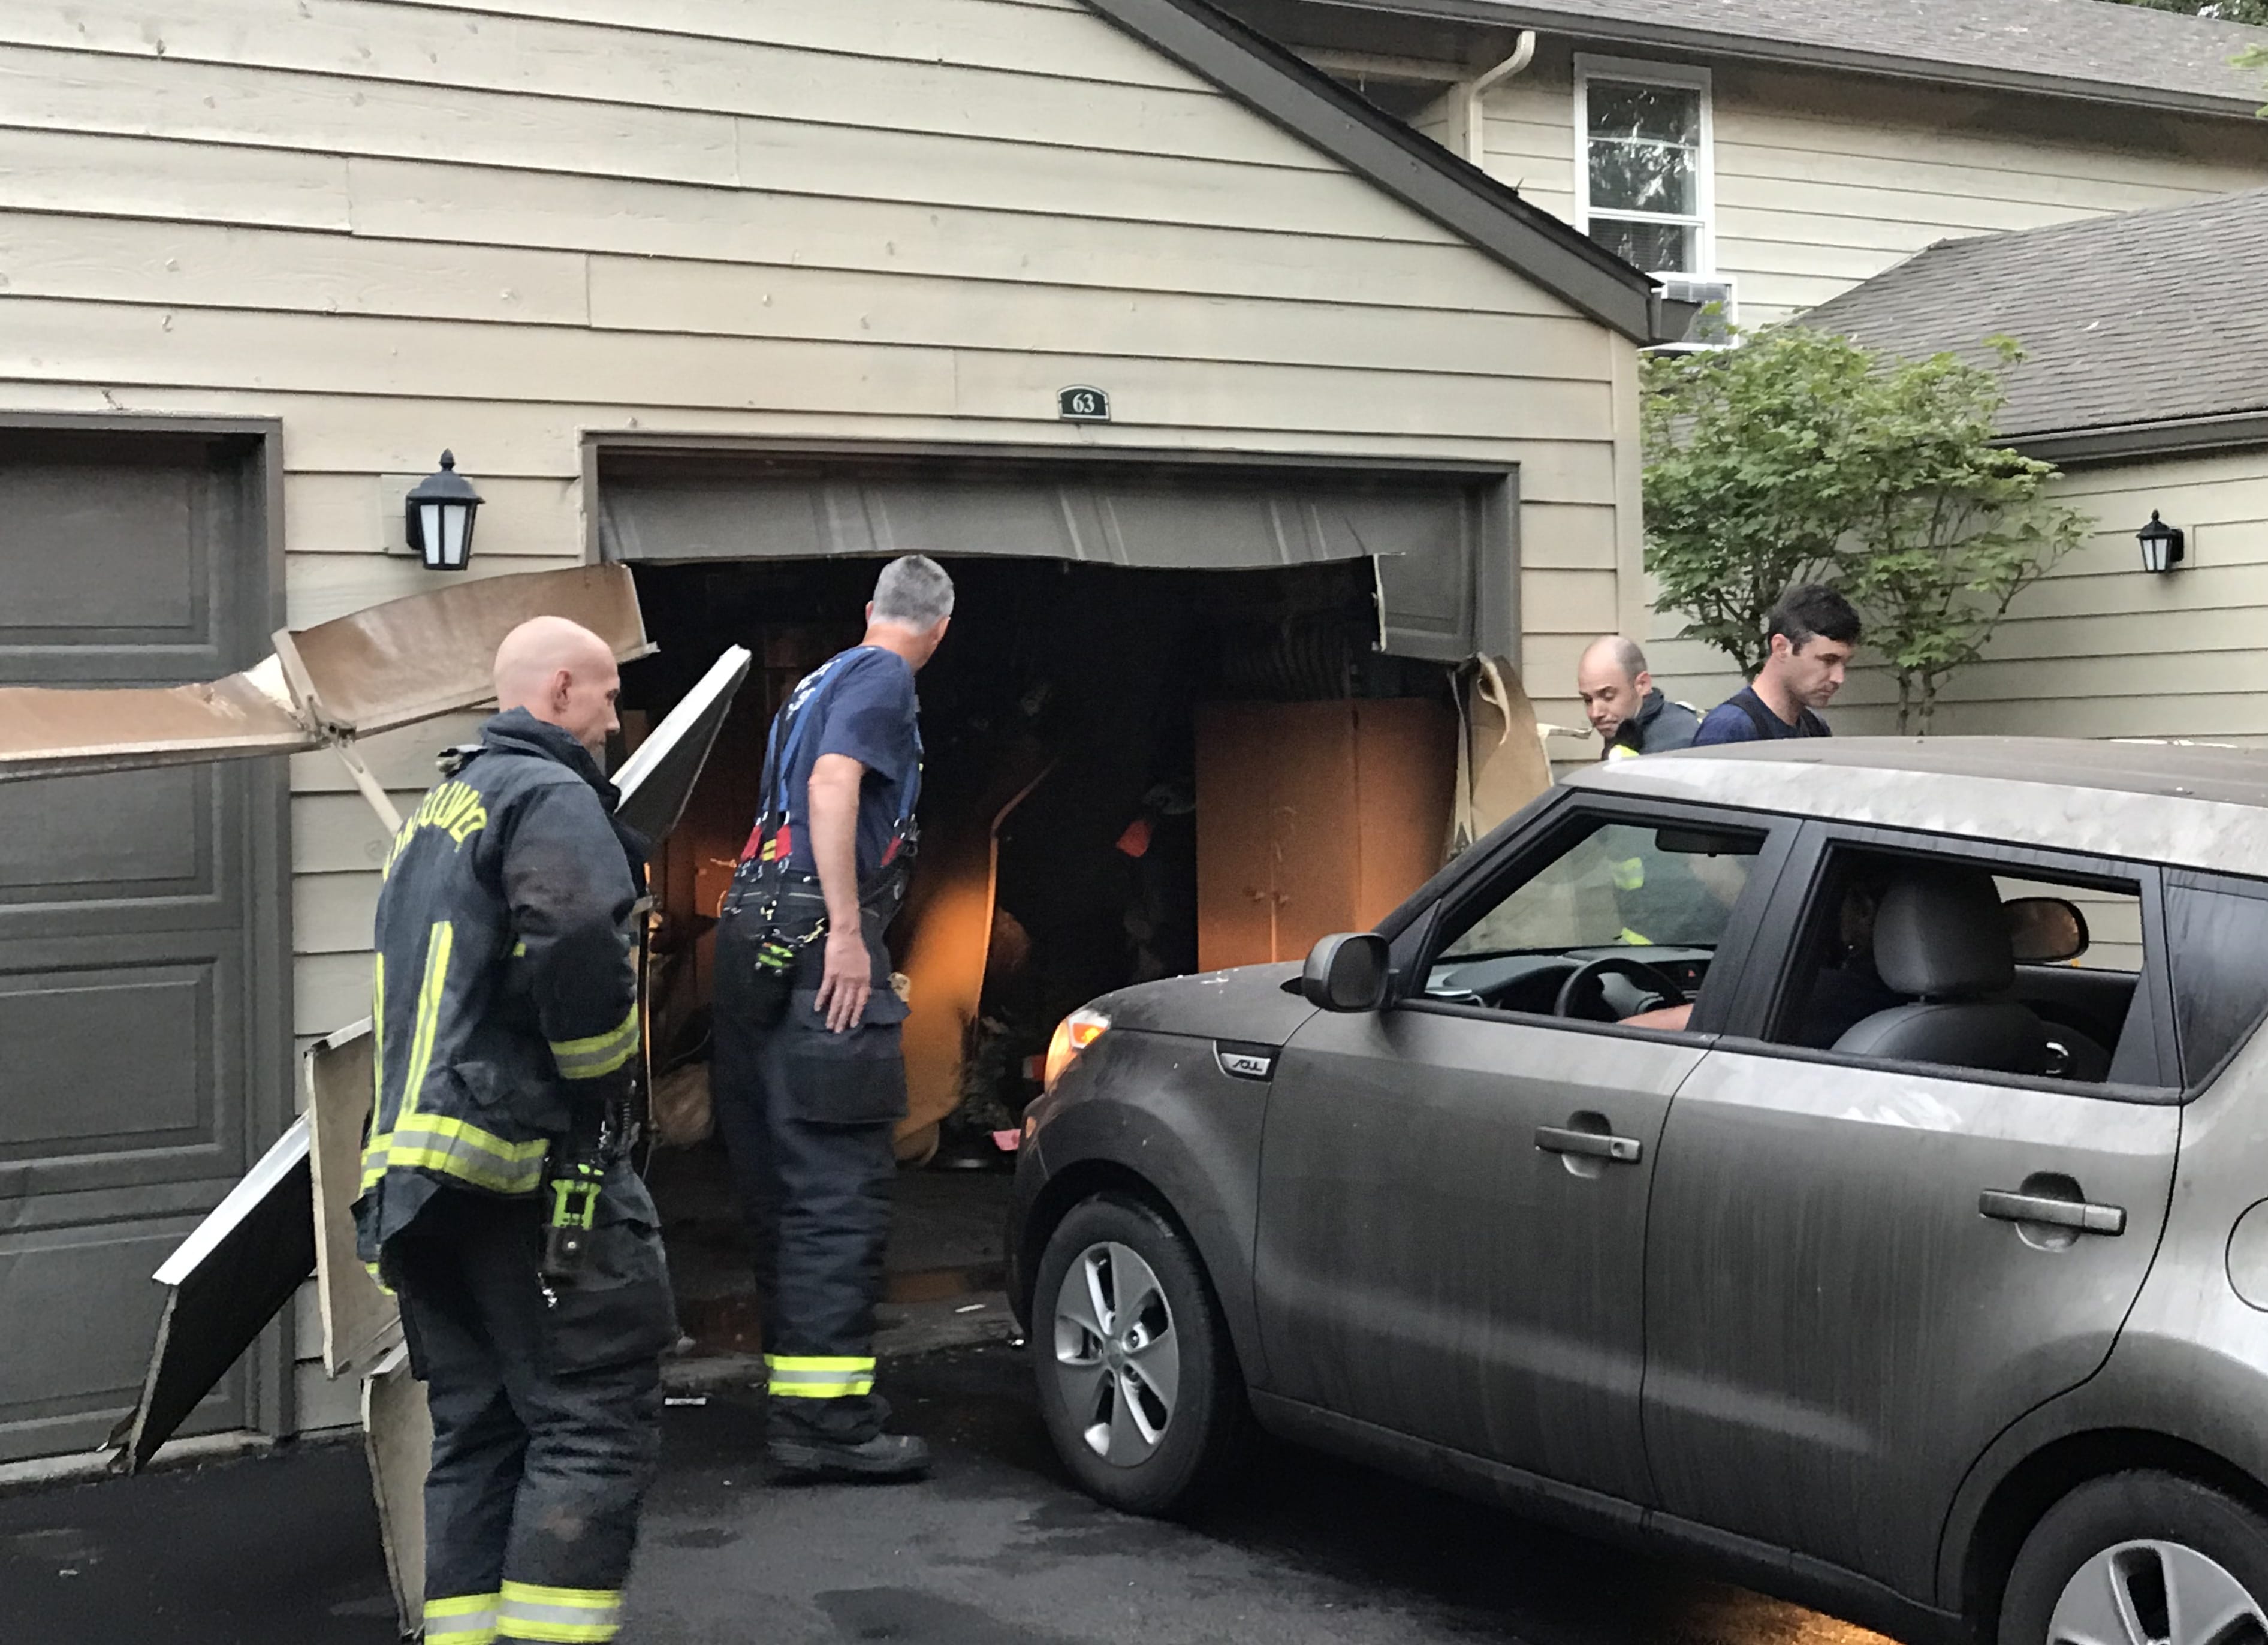 Fire District 6 and Vancouver Fire Department crews quickly extinguished a garage fire at the Crystal Creek Apartments on Friday morning, preventing its spread to nearby garages and apartments.